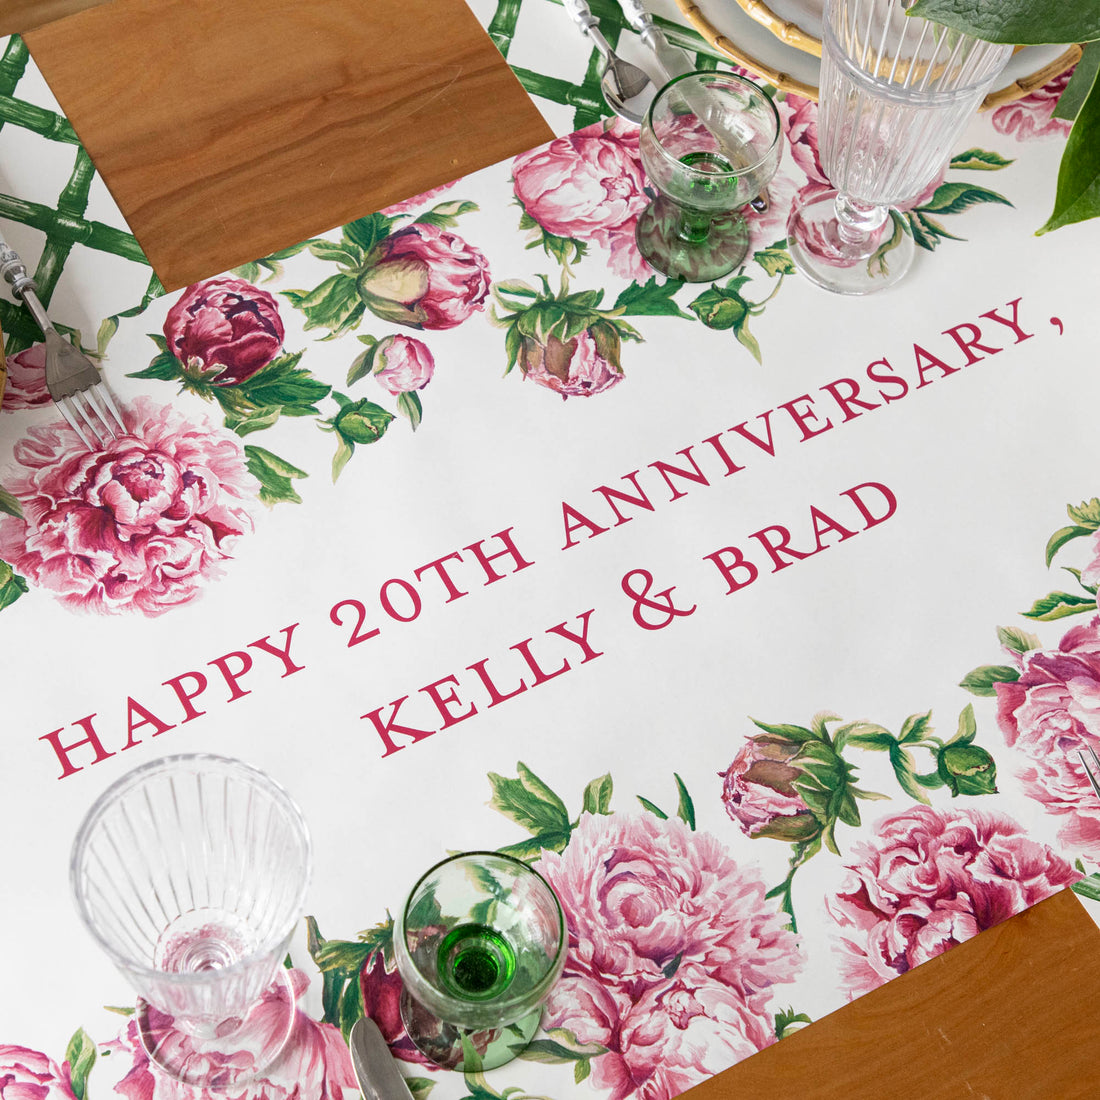 The Peony Personalized Runner, with &quot;HAPPY 20TH ANNIVERSARY, KELLY &amp; BRAD&quot; printed down the middle in dark pink, under an elegant table setting.